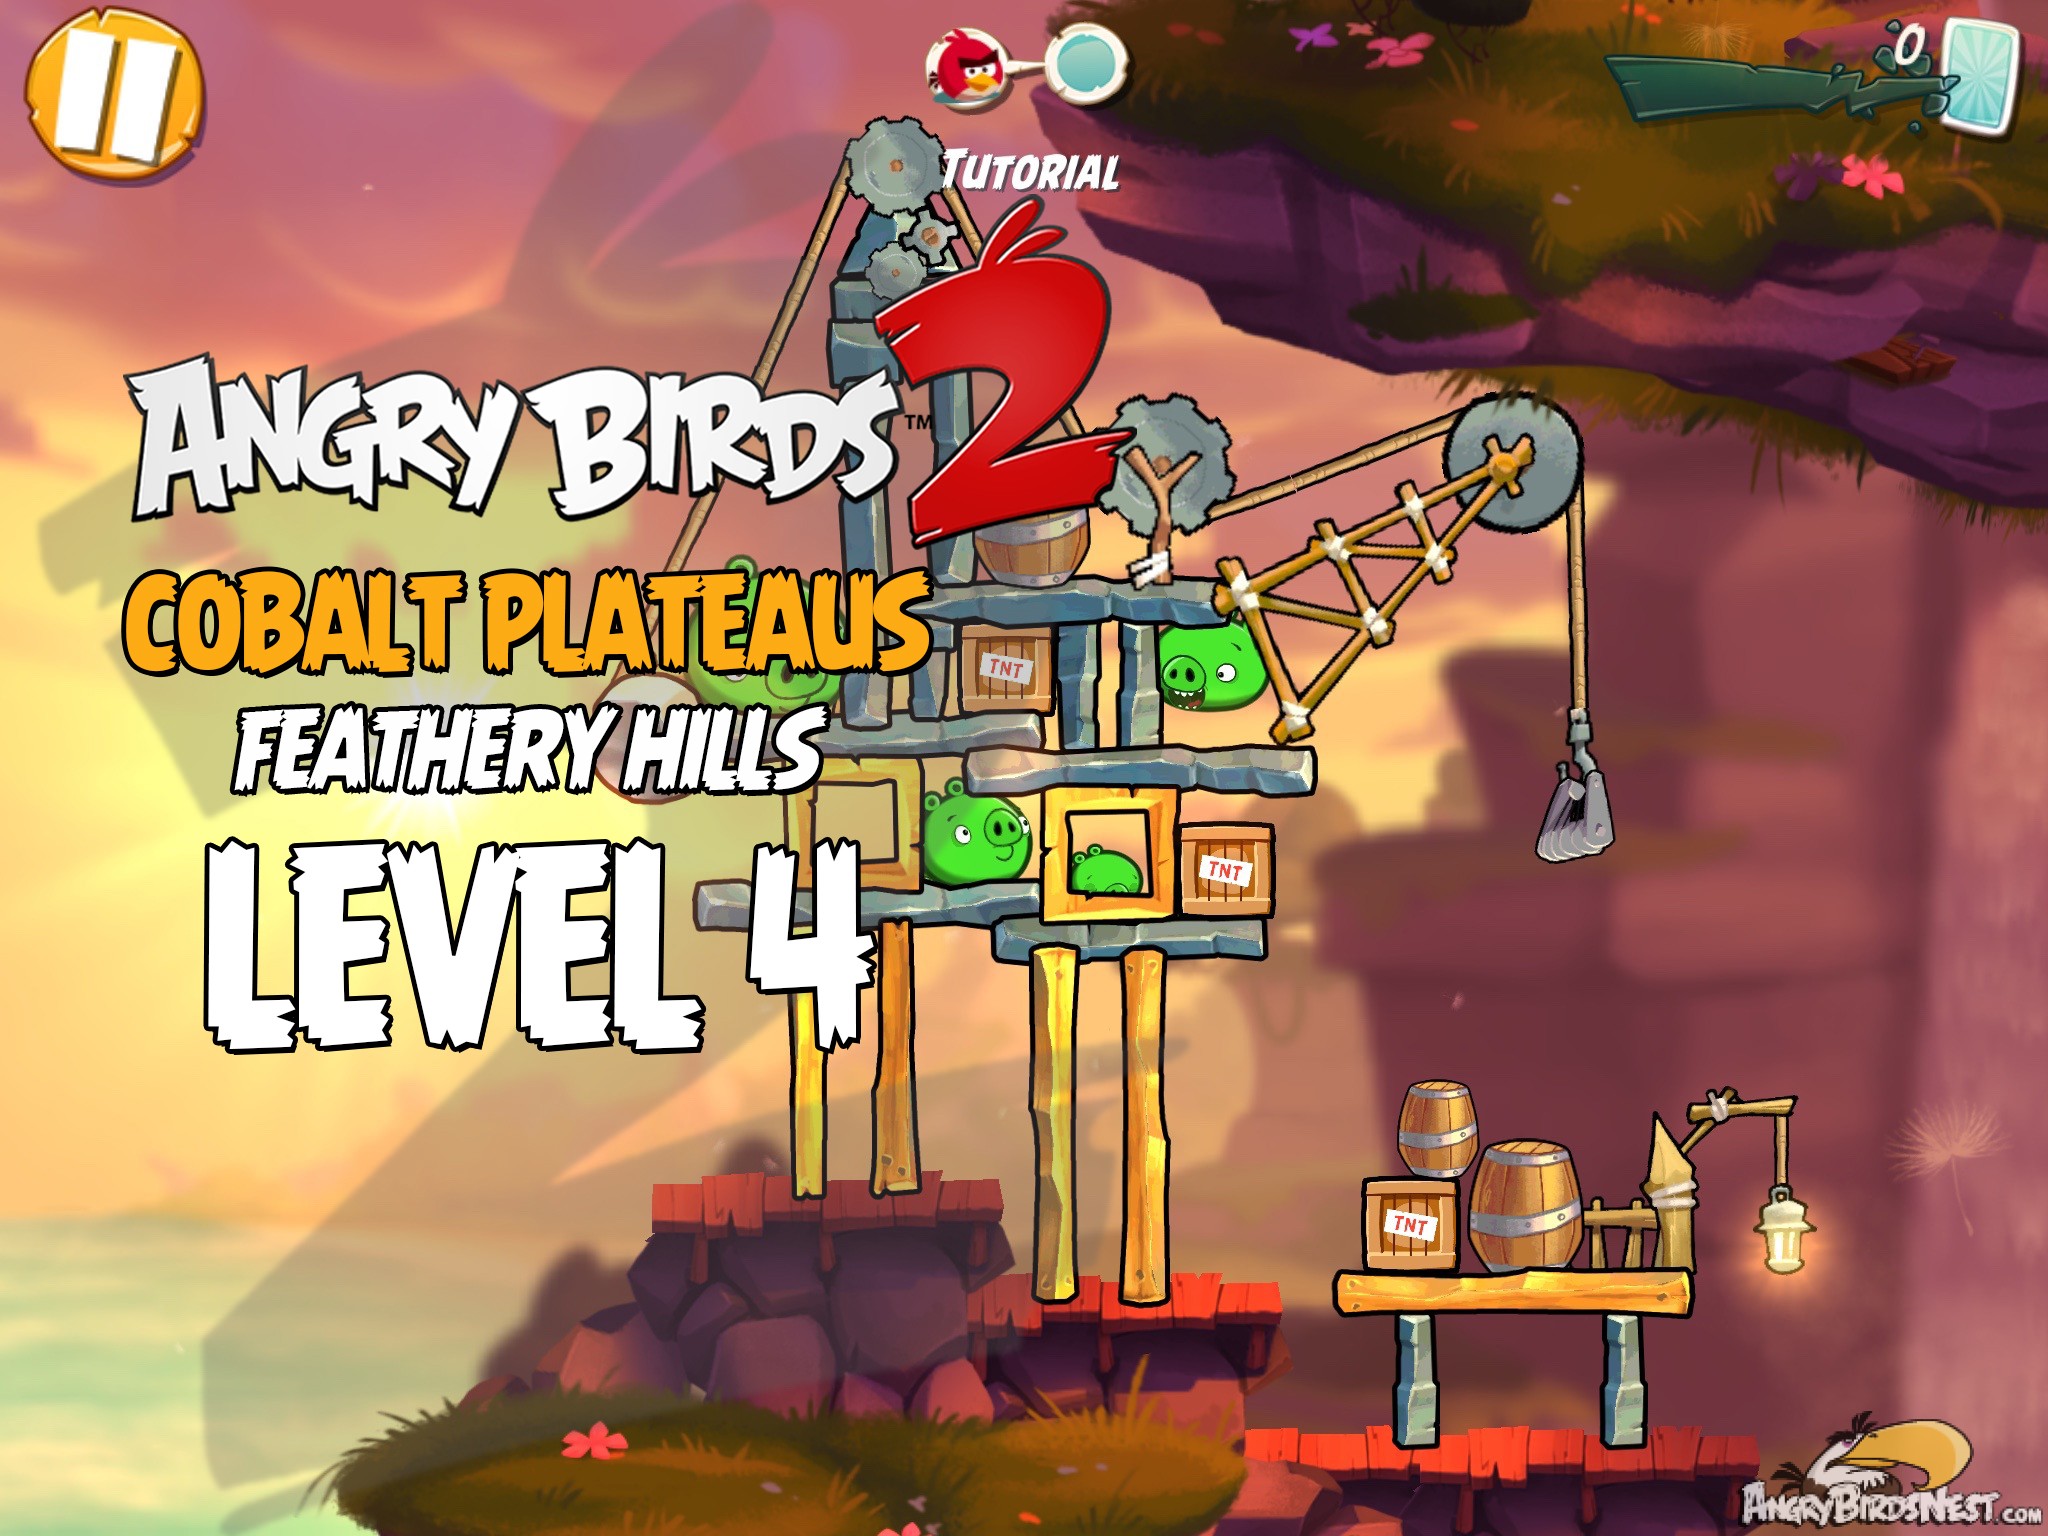 Angry Birds 2 Cobalt Plateaus Feathery Hills Level 4